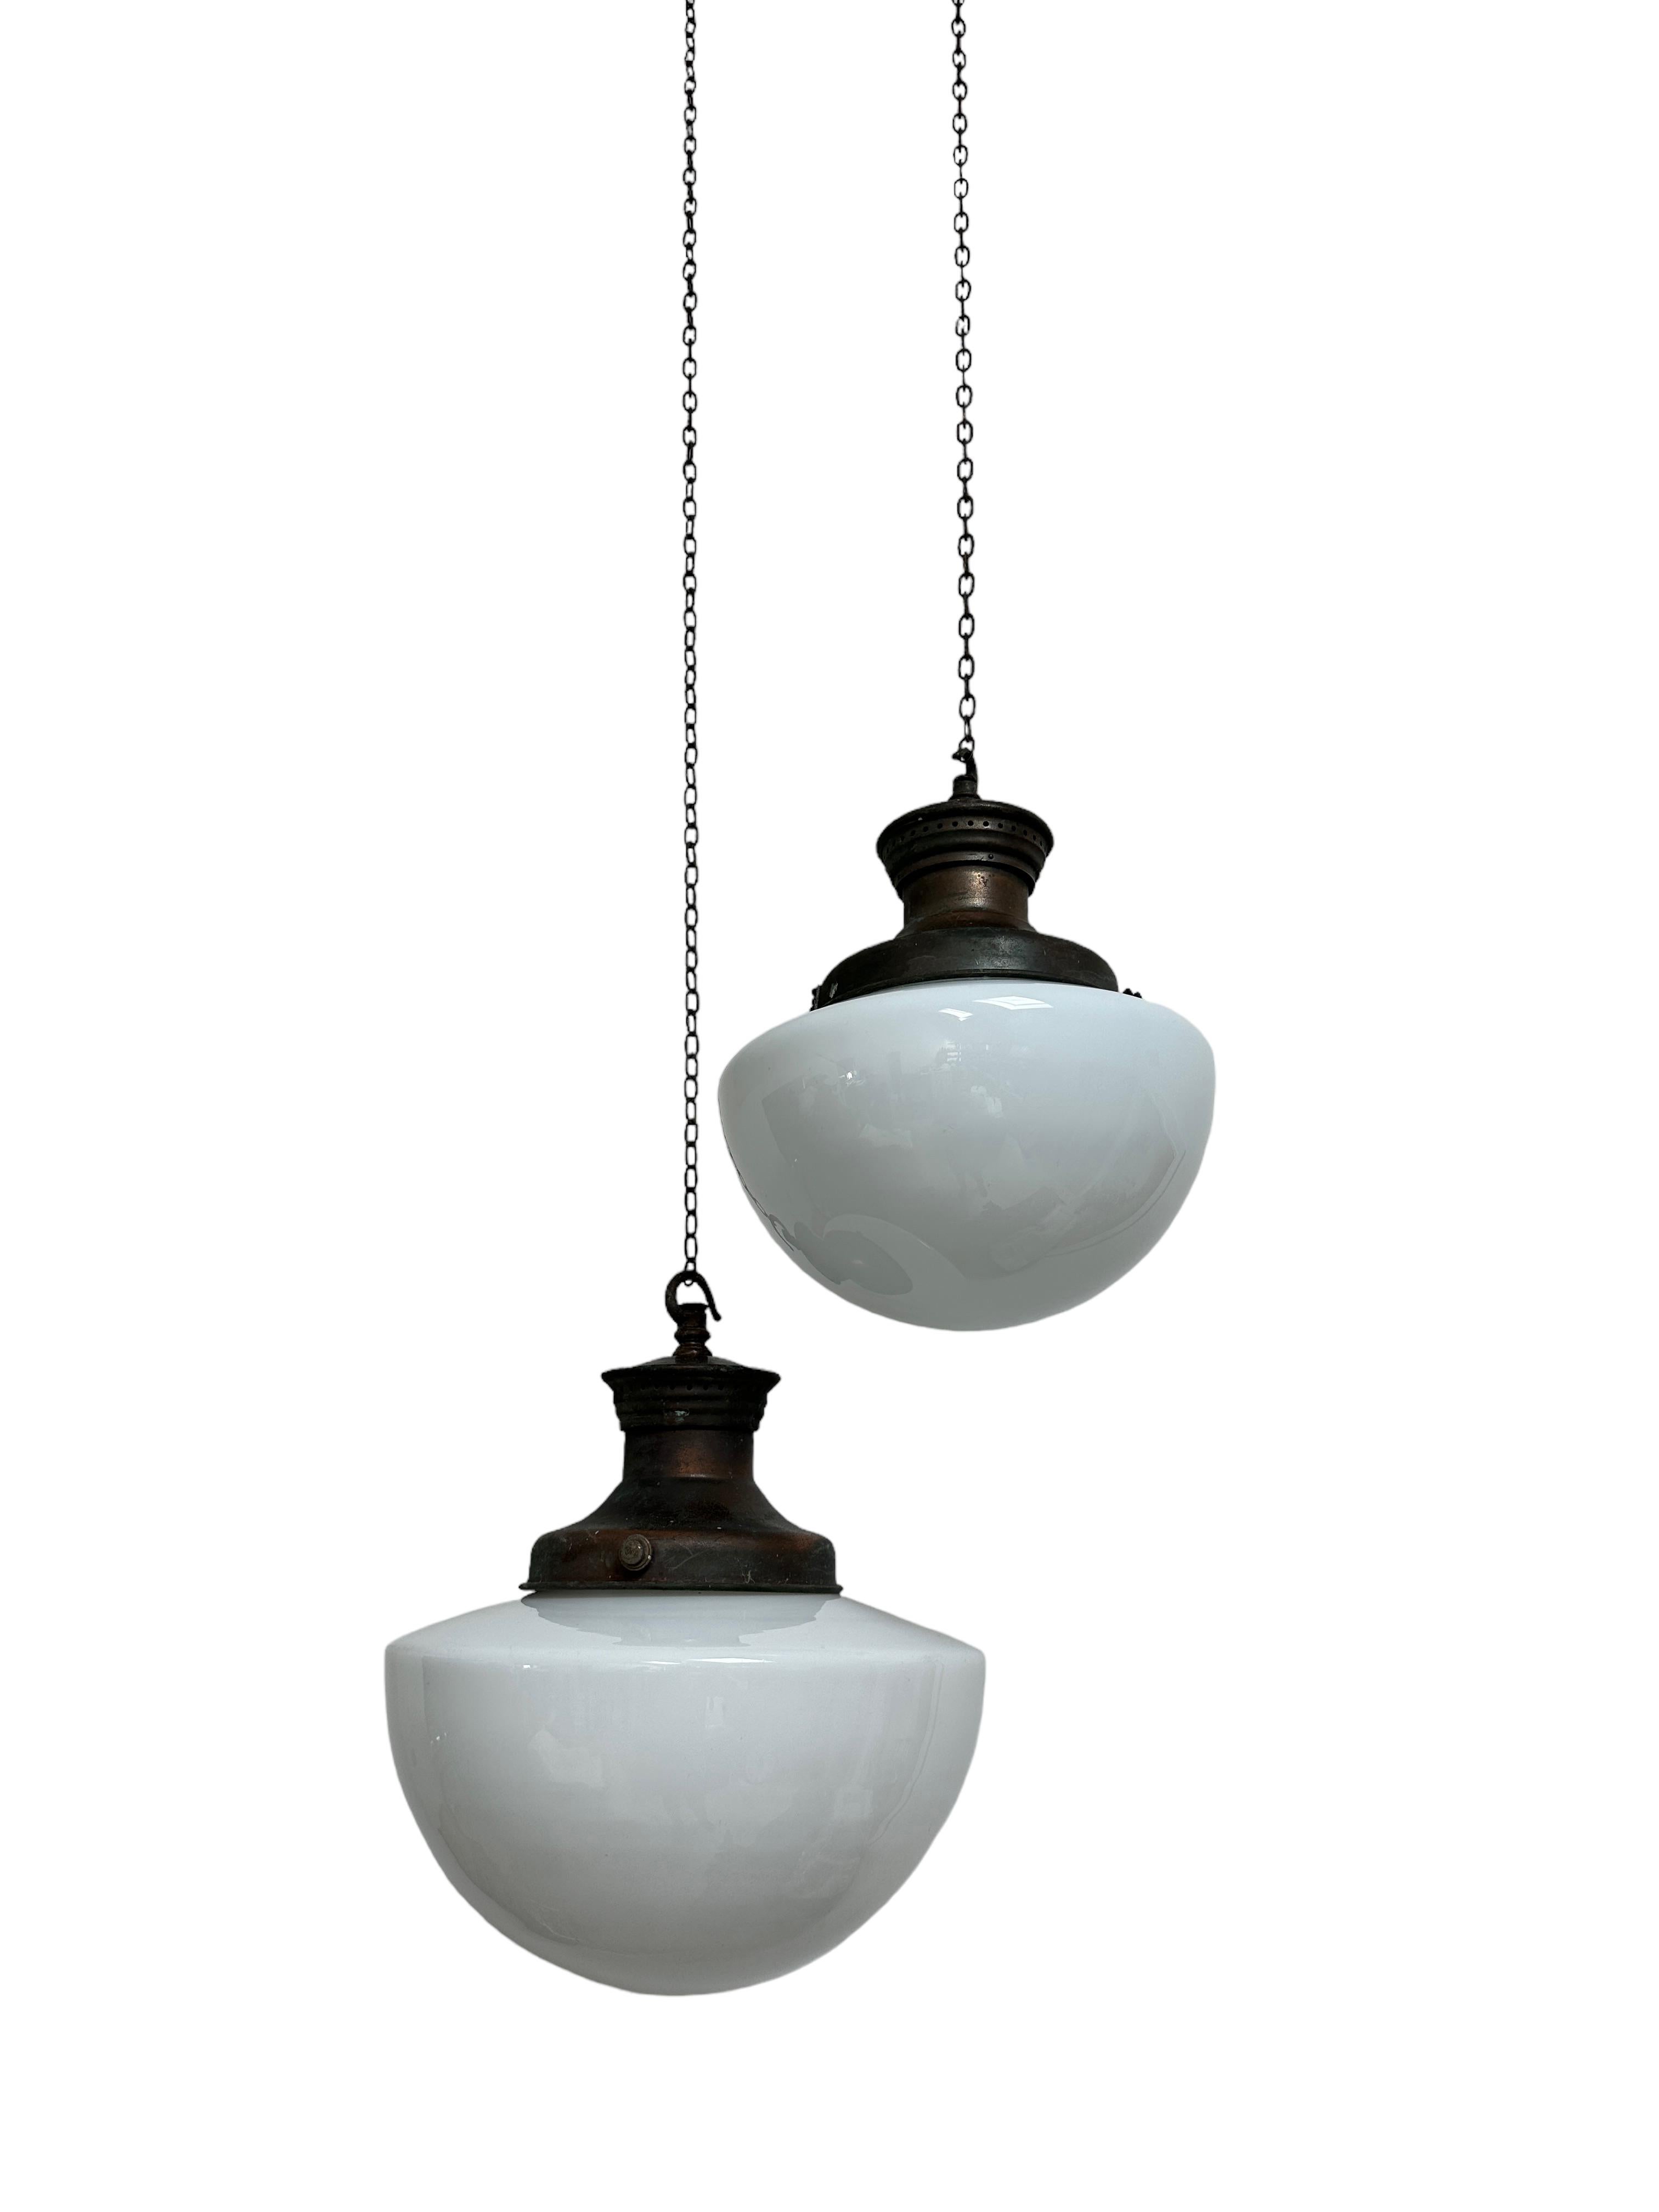 - A beautiful church opaline pendant light with patinated decorative gallery, England circa 1930.
- Wear commensurate with age, all in very good condition, lovely deep oval shape to the opaline glass and the gallery is unique in the fact that it is